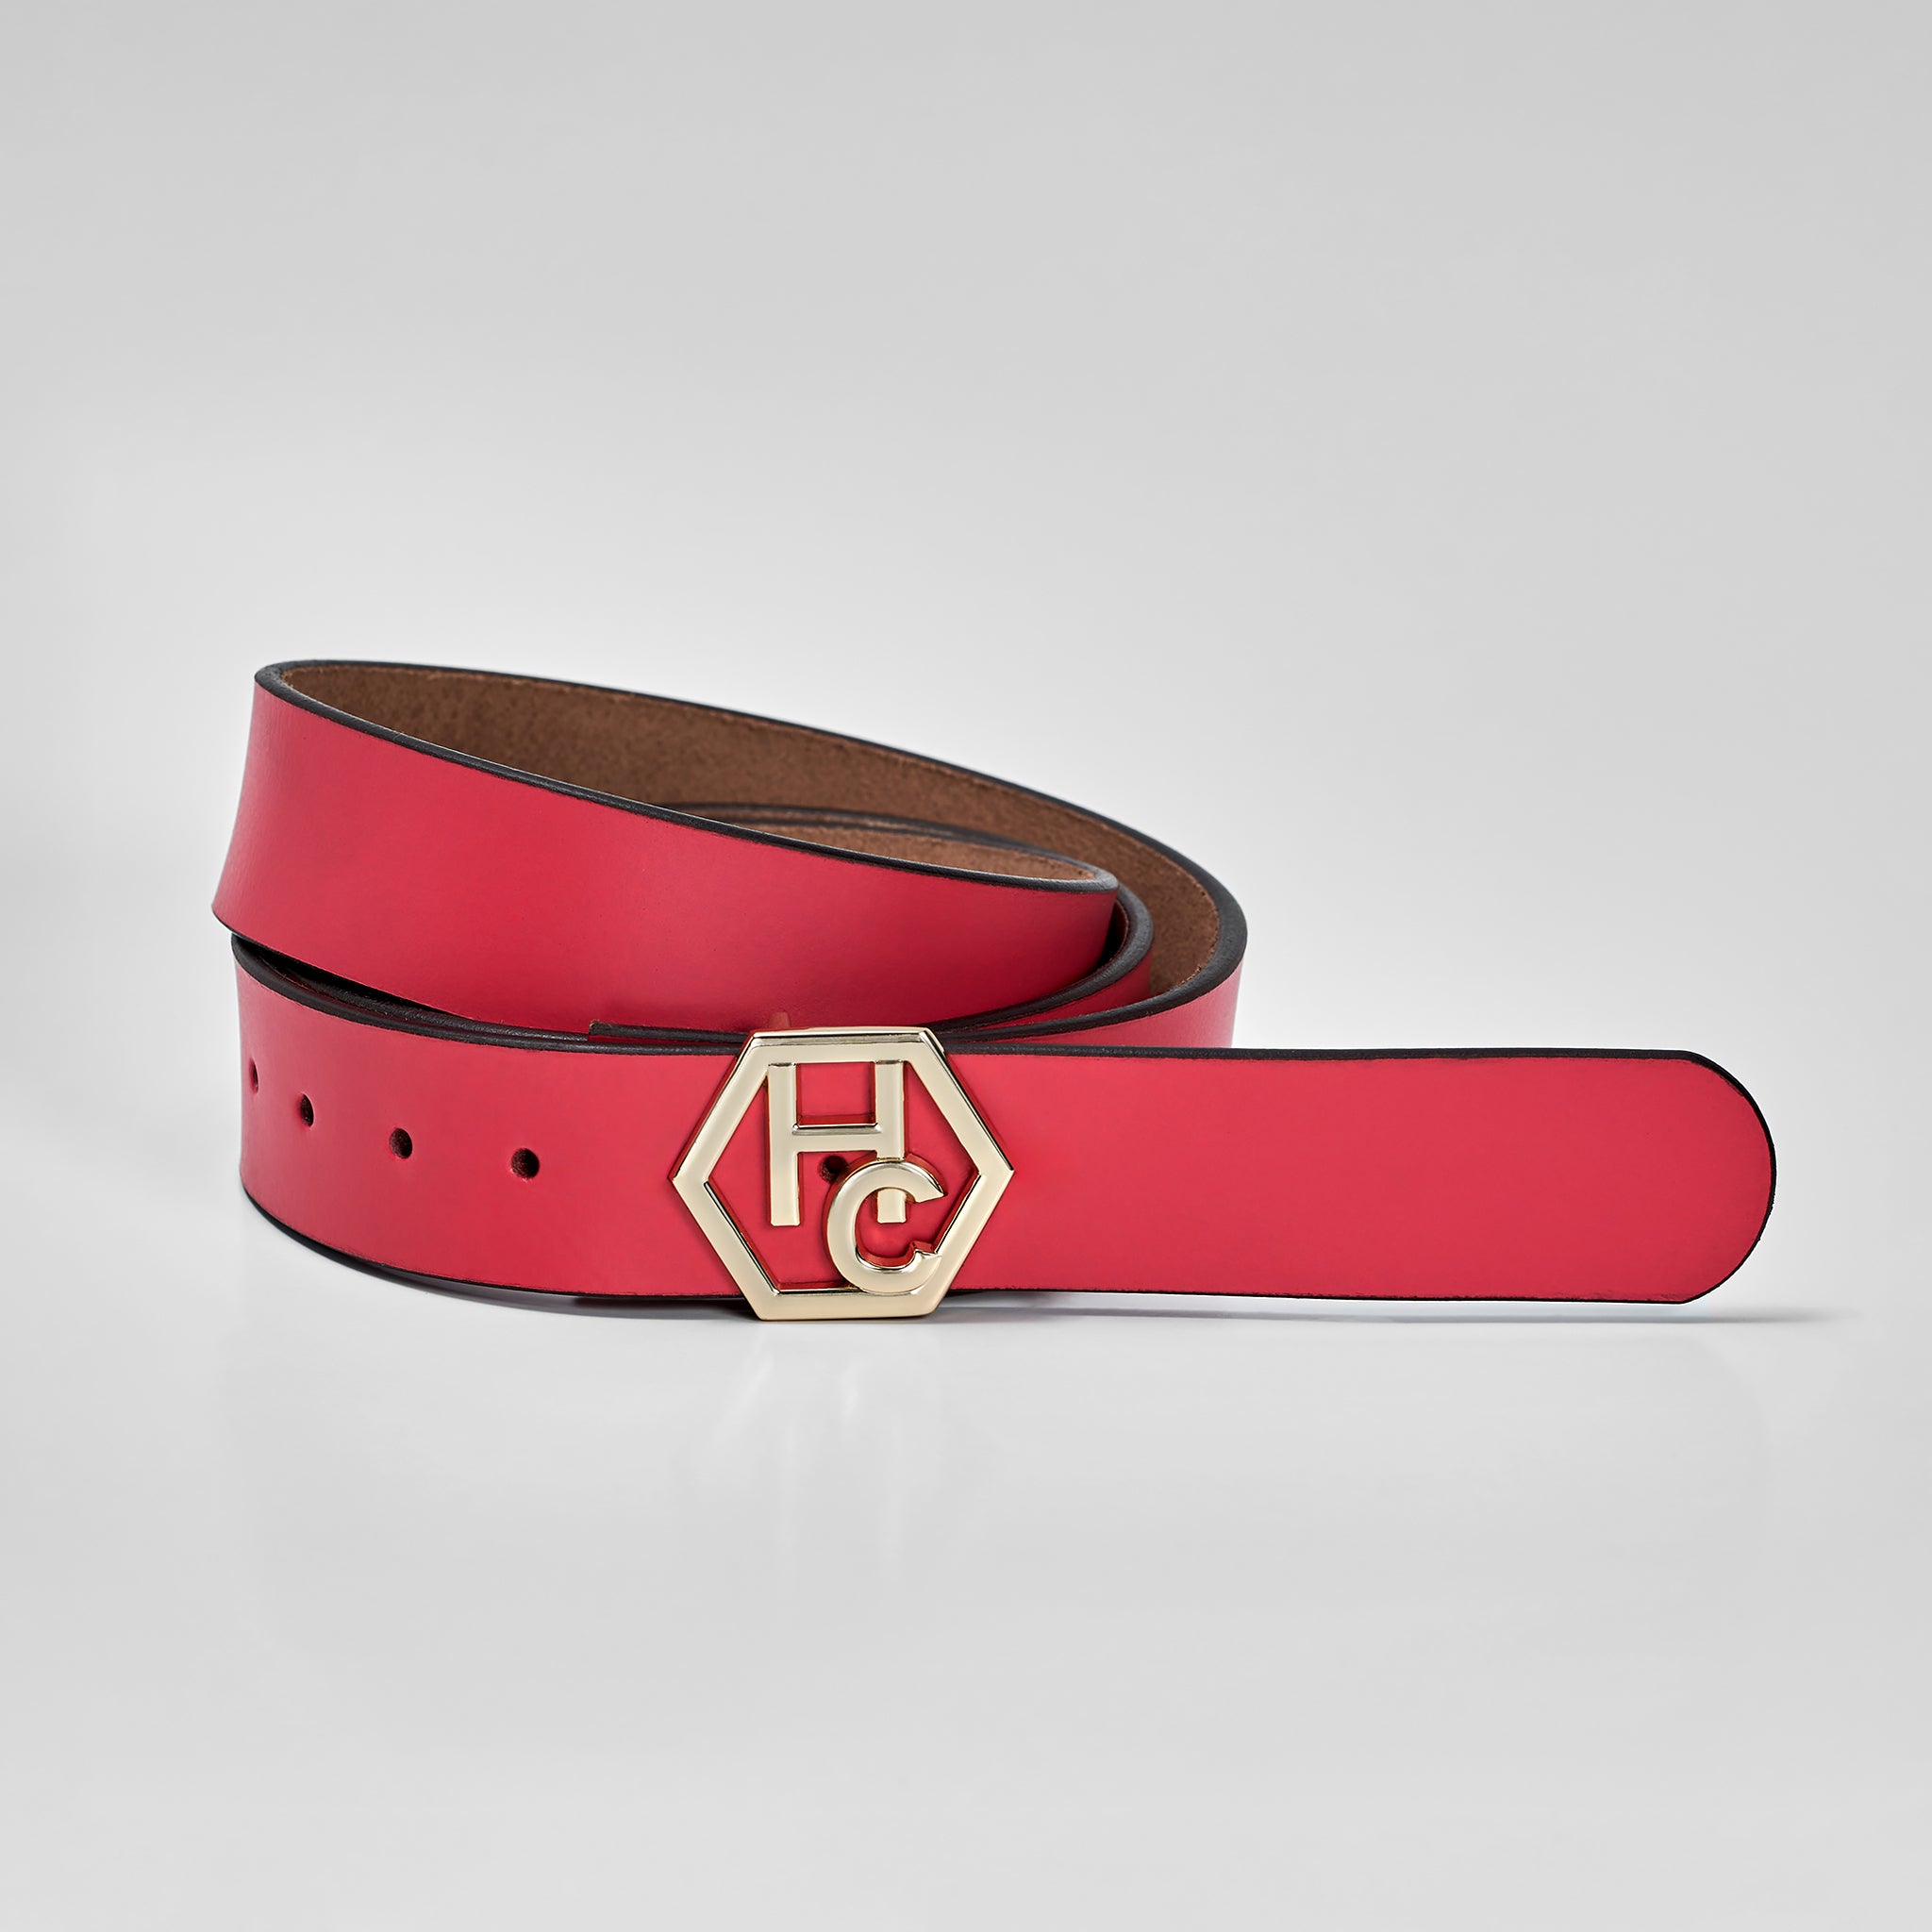 Hedonist Chicago Seamless Pink Red Leather Belt 1.3" 32381343203479